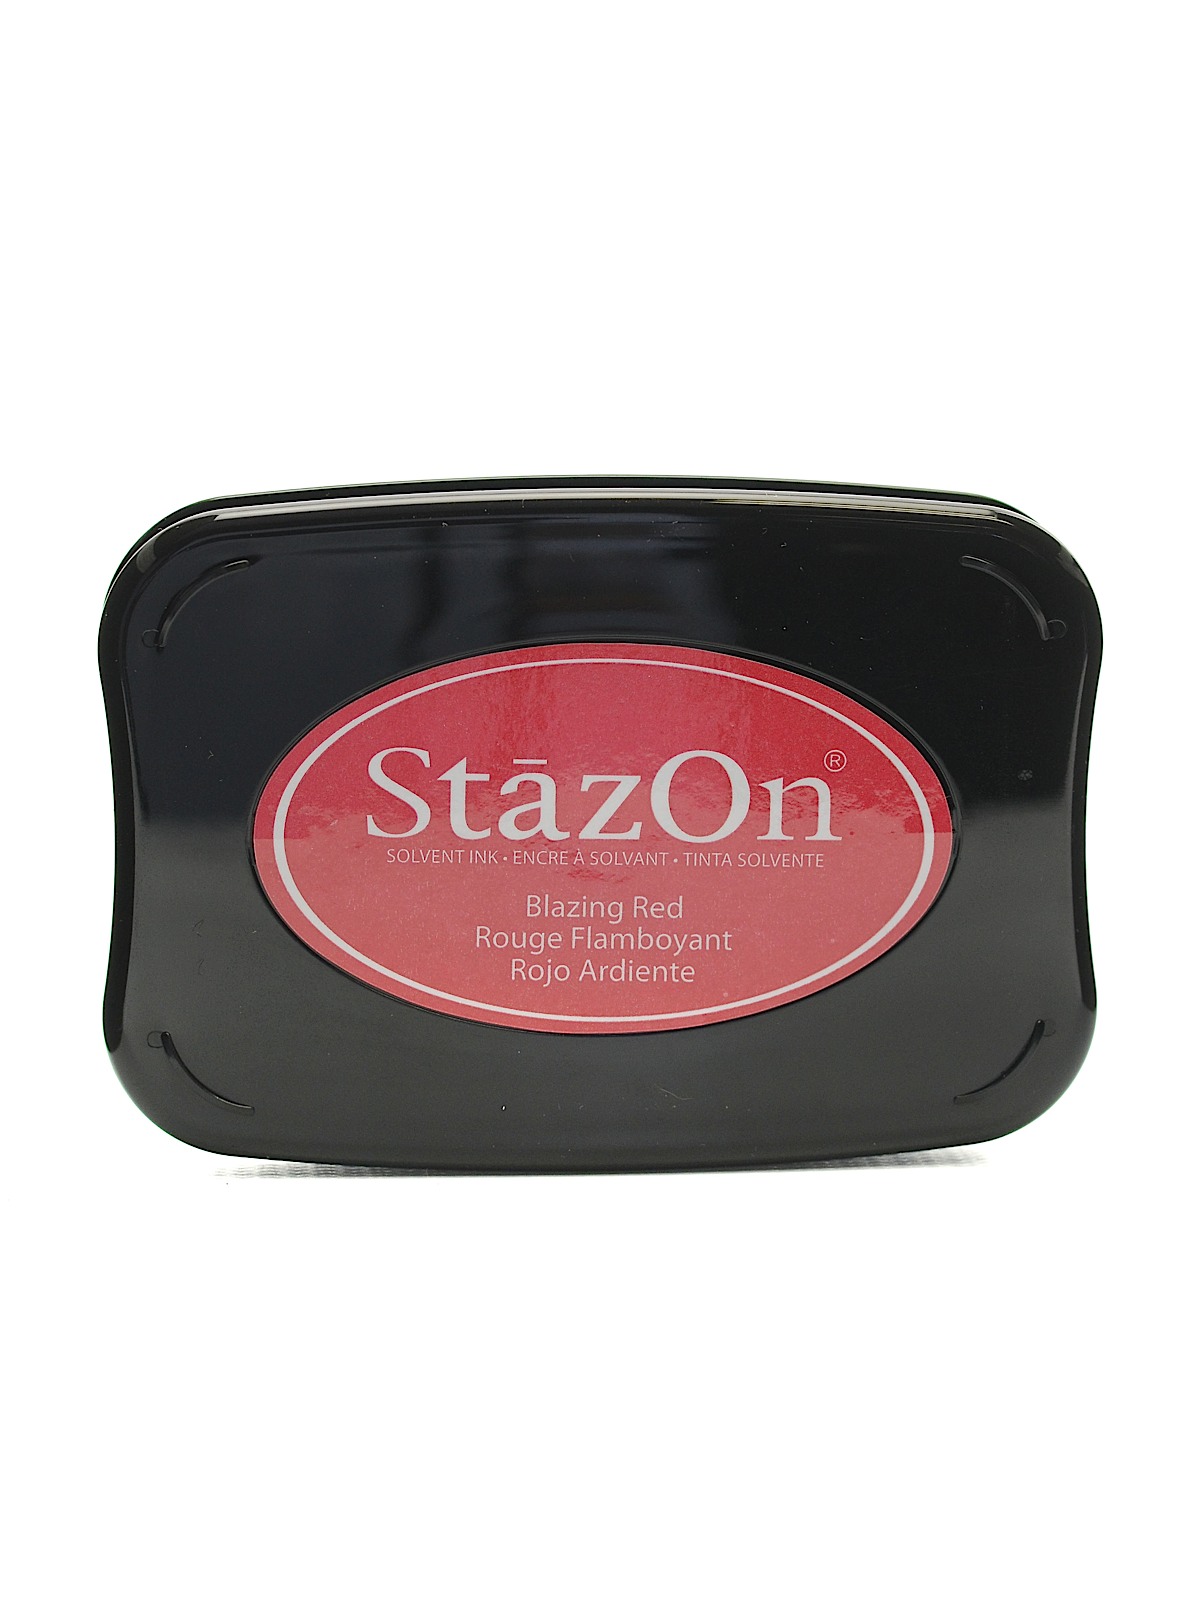 Stazon Solvent Ink Blazing Red 3.75 In. X 2.625 In. Full-size Pad